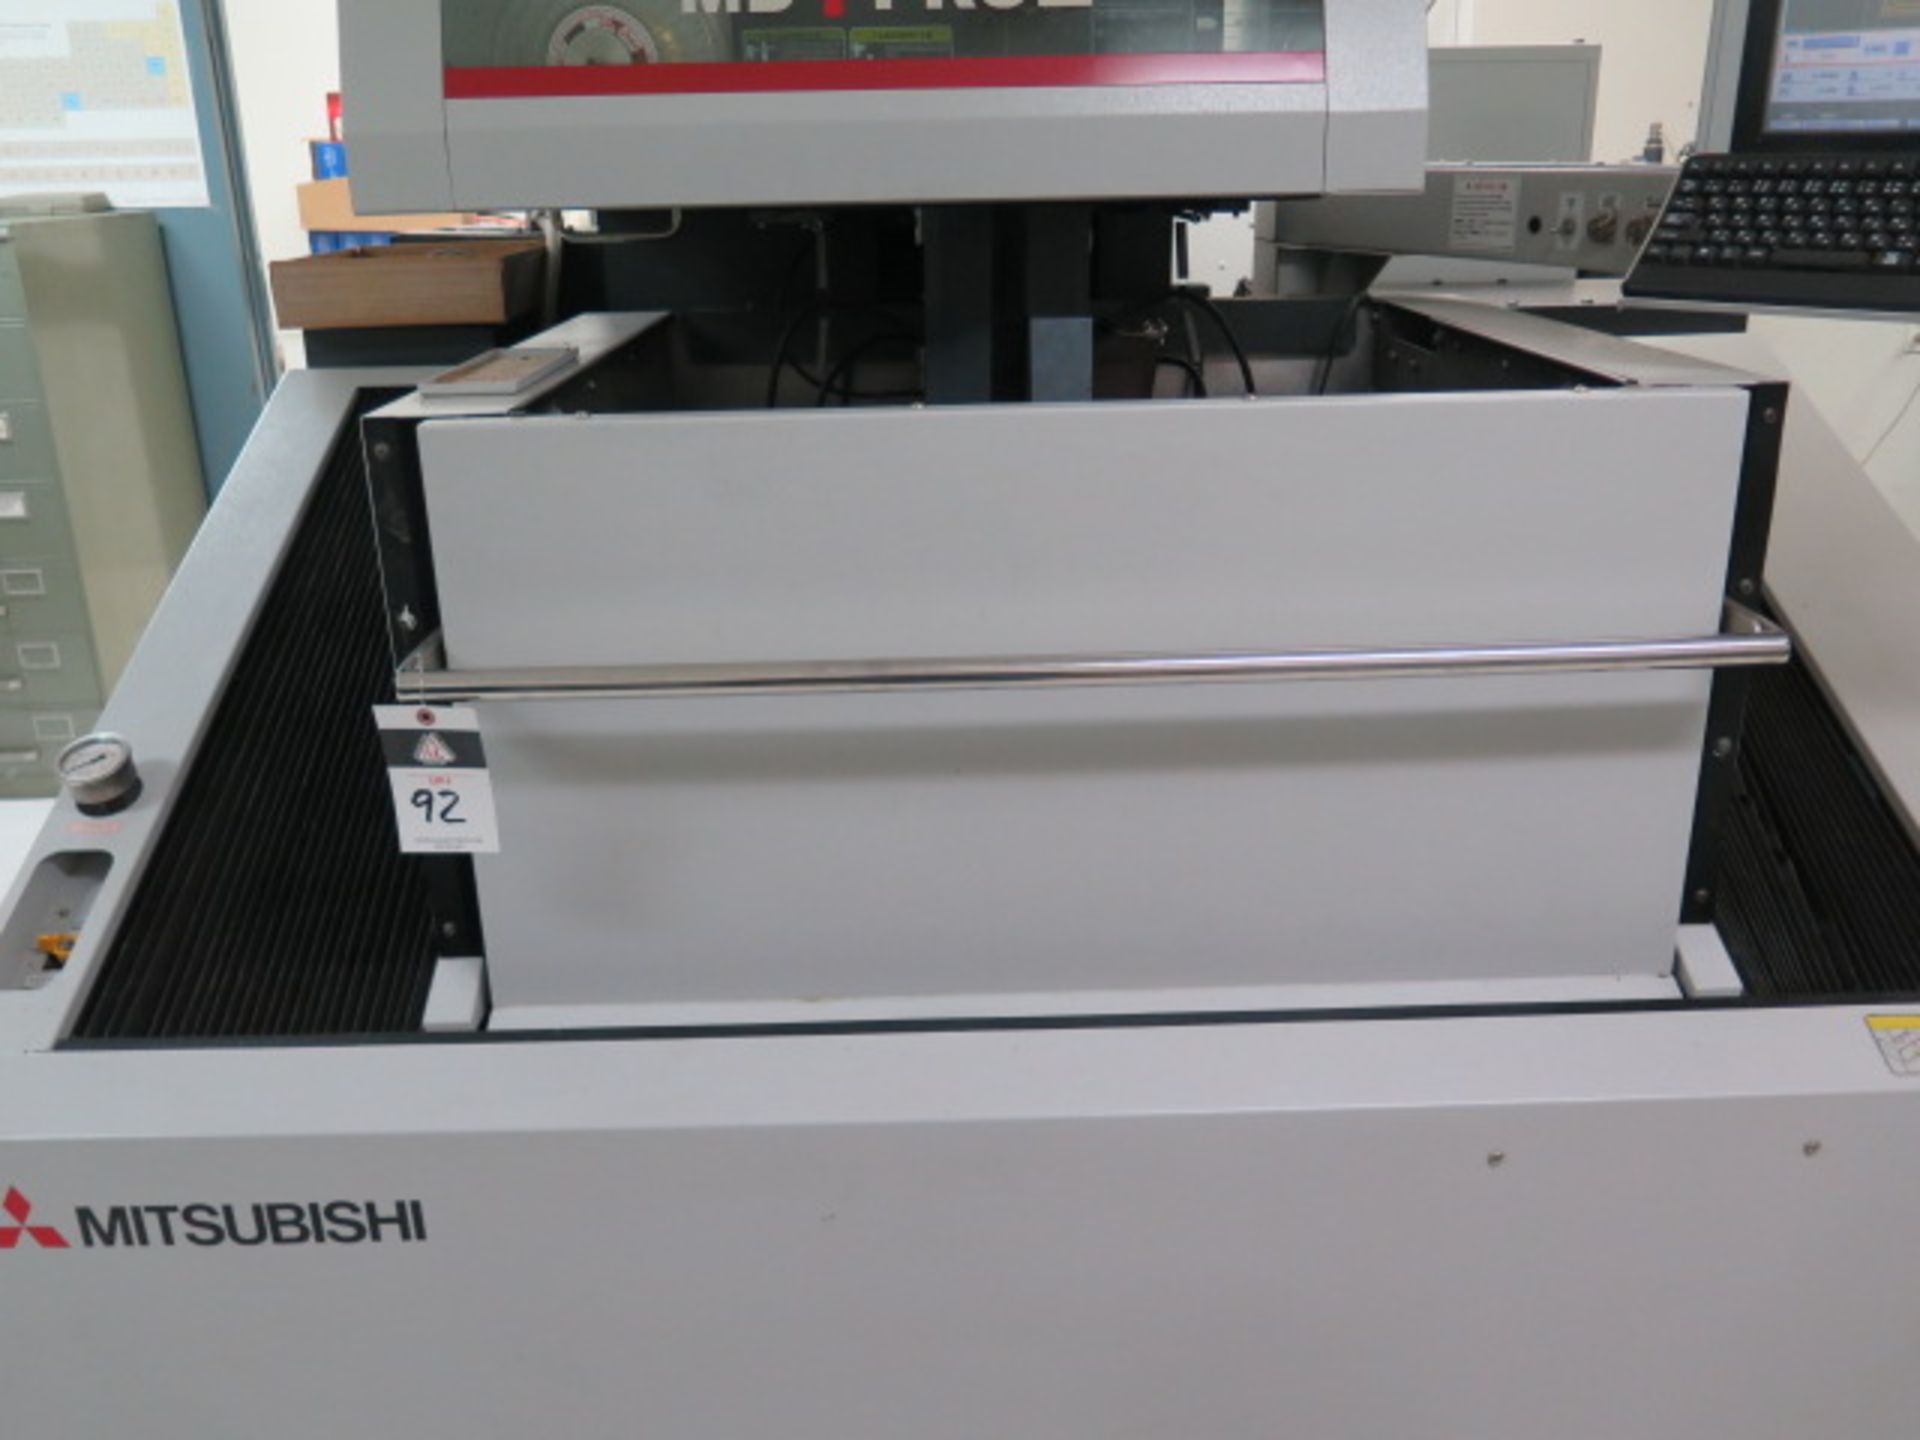 2013 Mitsubishi MD+ PRO III mdl. MV1200S CNC Wire EDM s/n 53DM1687 w/ Mitsubishi M700, SOLD AS IS - Image 4 of 23